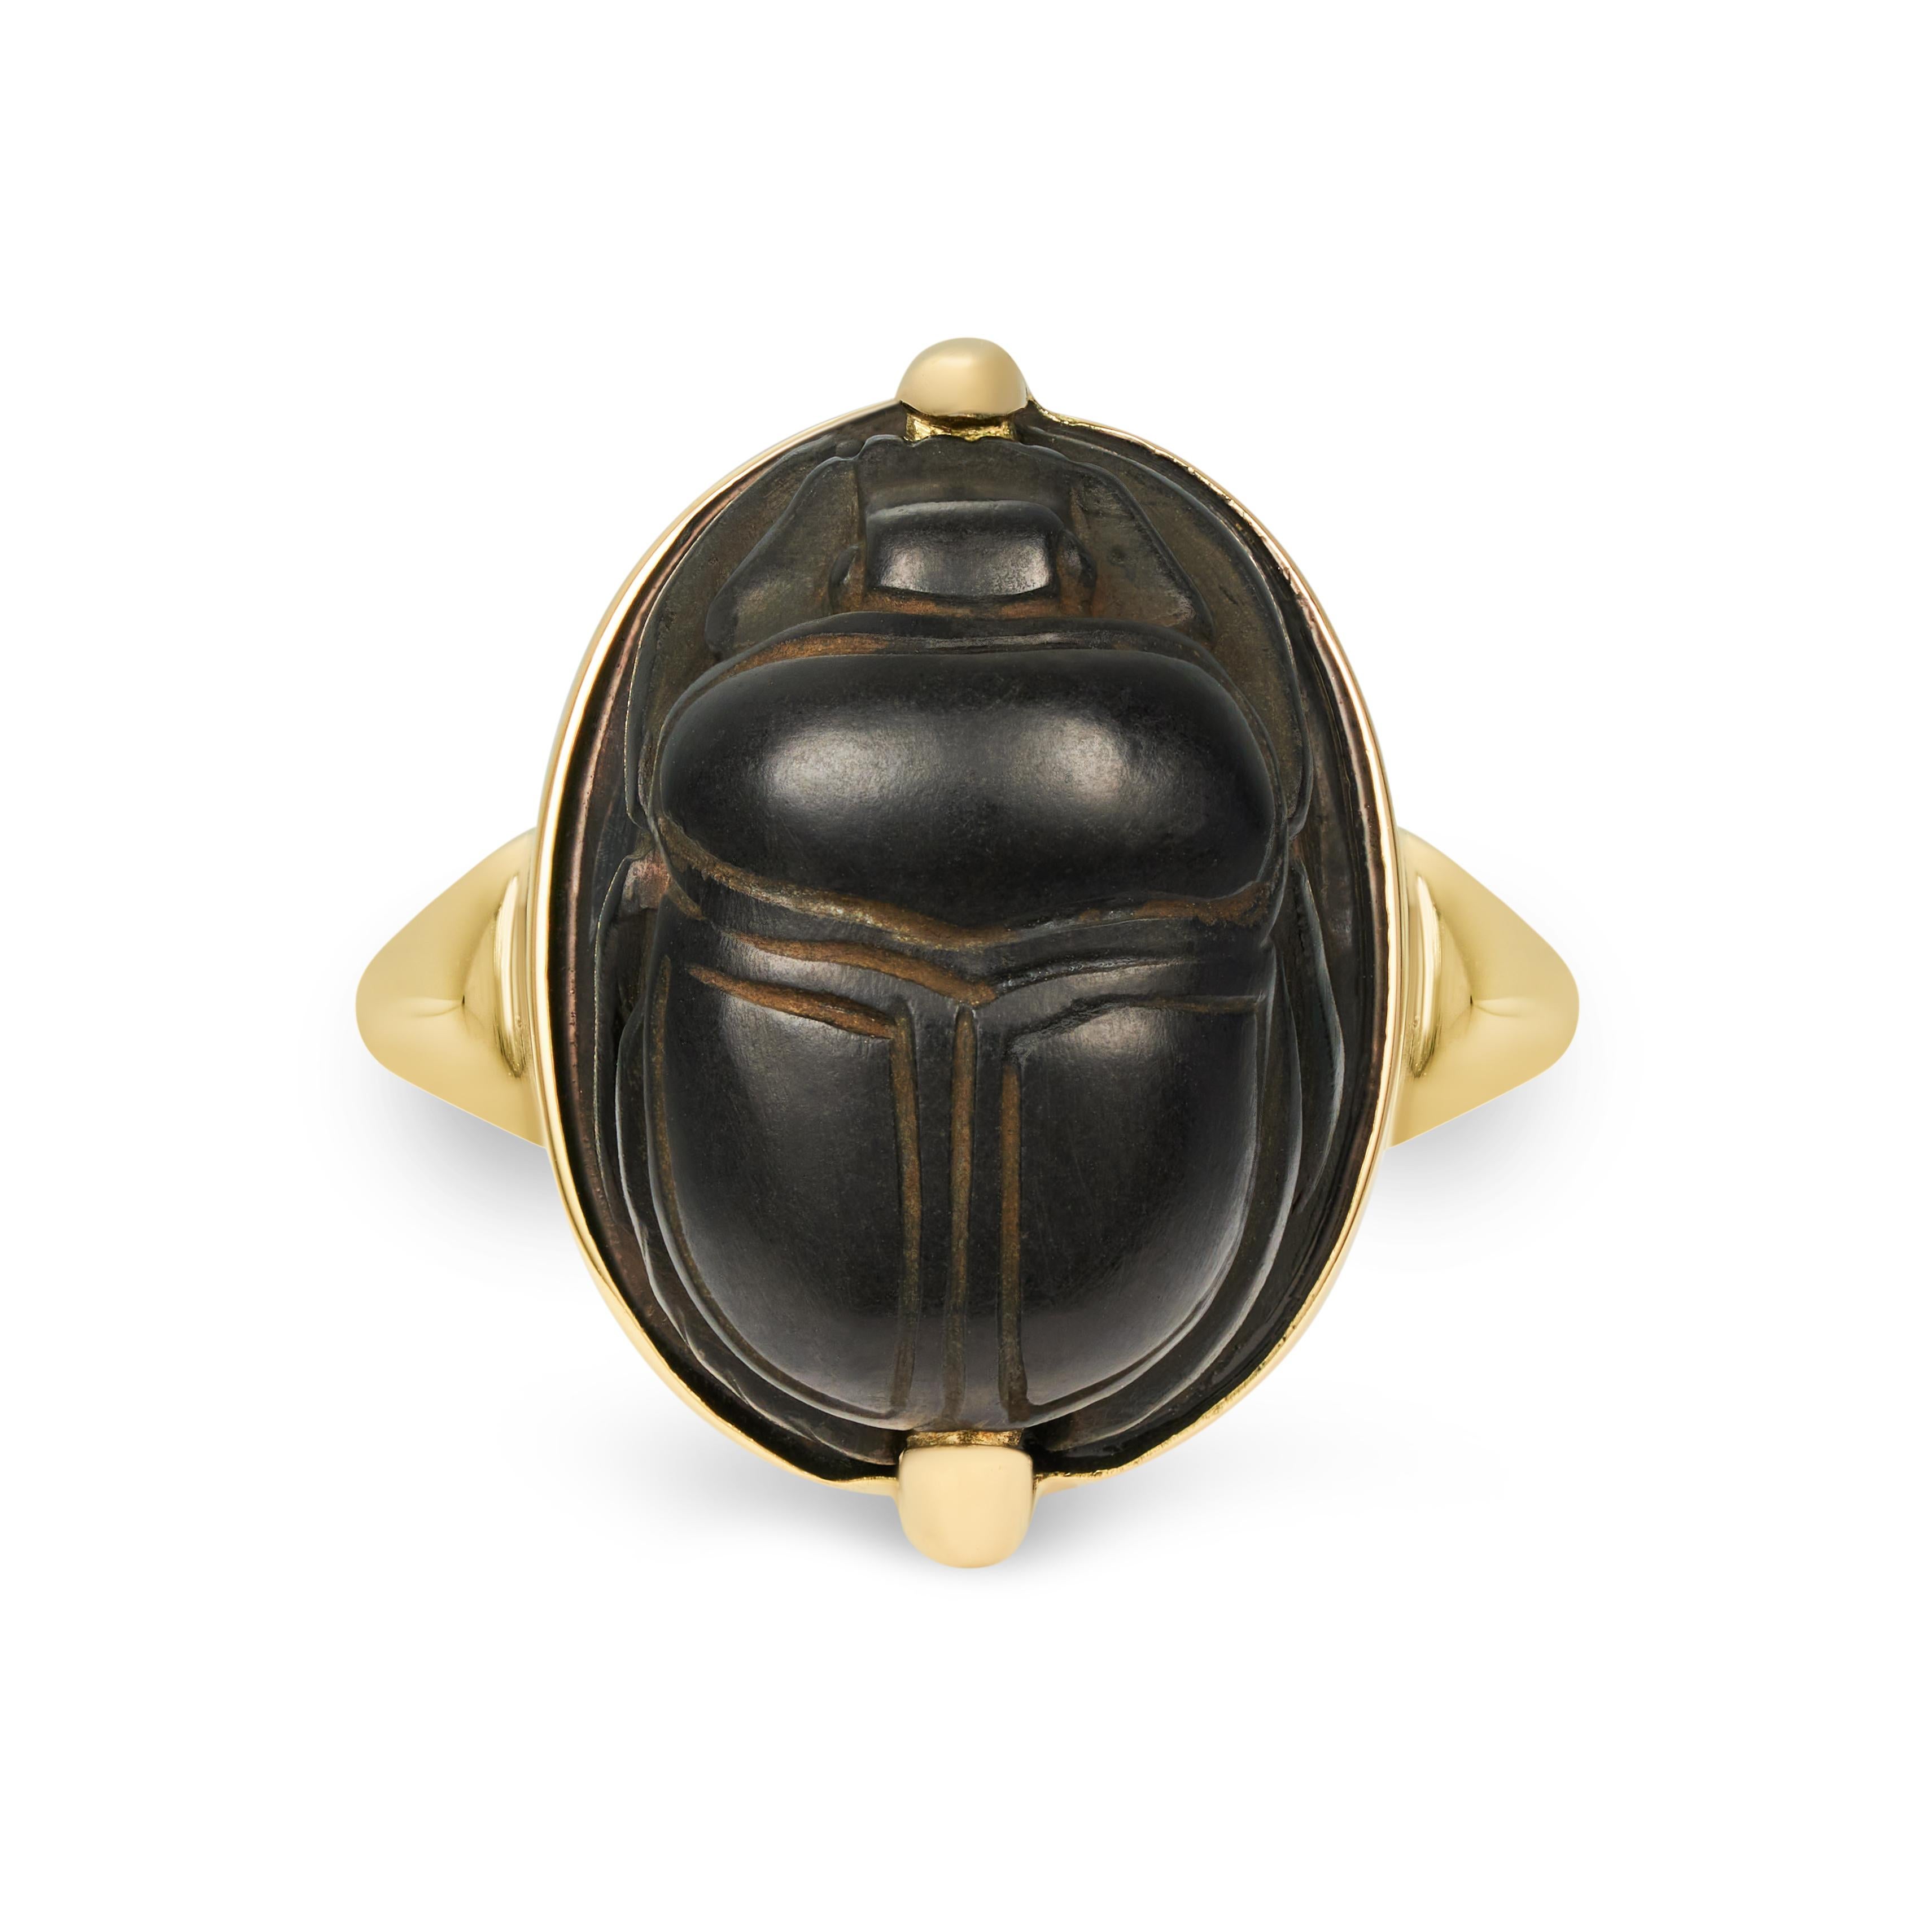 This DUBINI ring features an ancient Egyptian scarab circa 1085-713 B.C. set in 18K yellow gold.

A black stone scarab with an oval body and a gently rounded upper side detailing the clypeus, prothorax, and wings. This scarab has wonderfully moulded